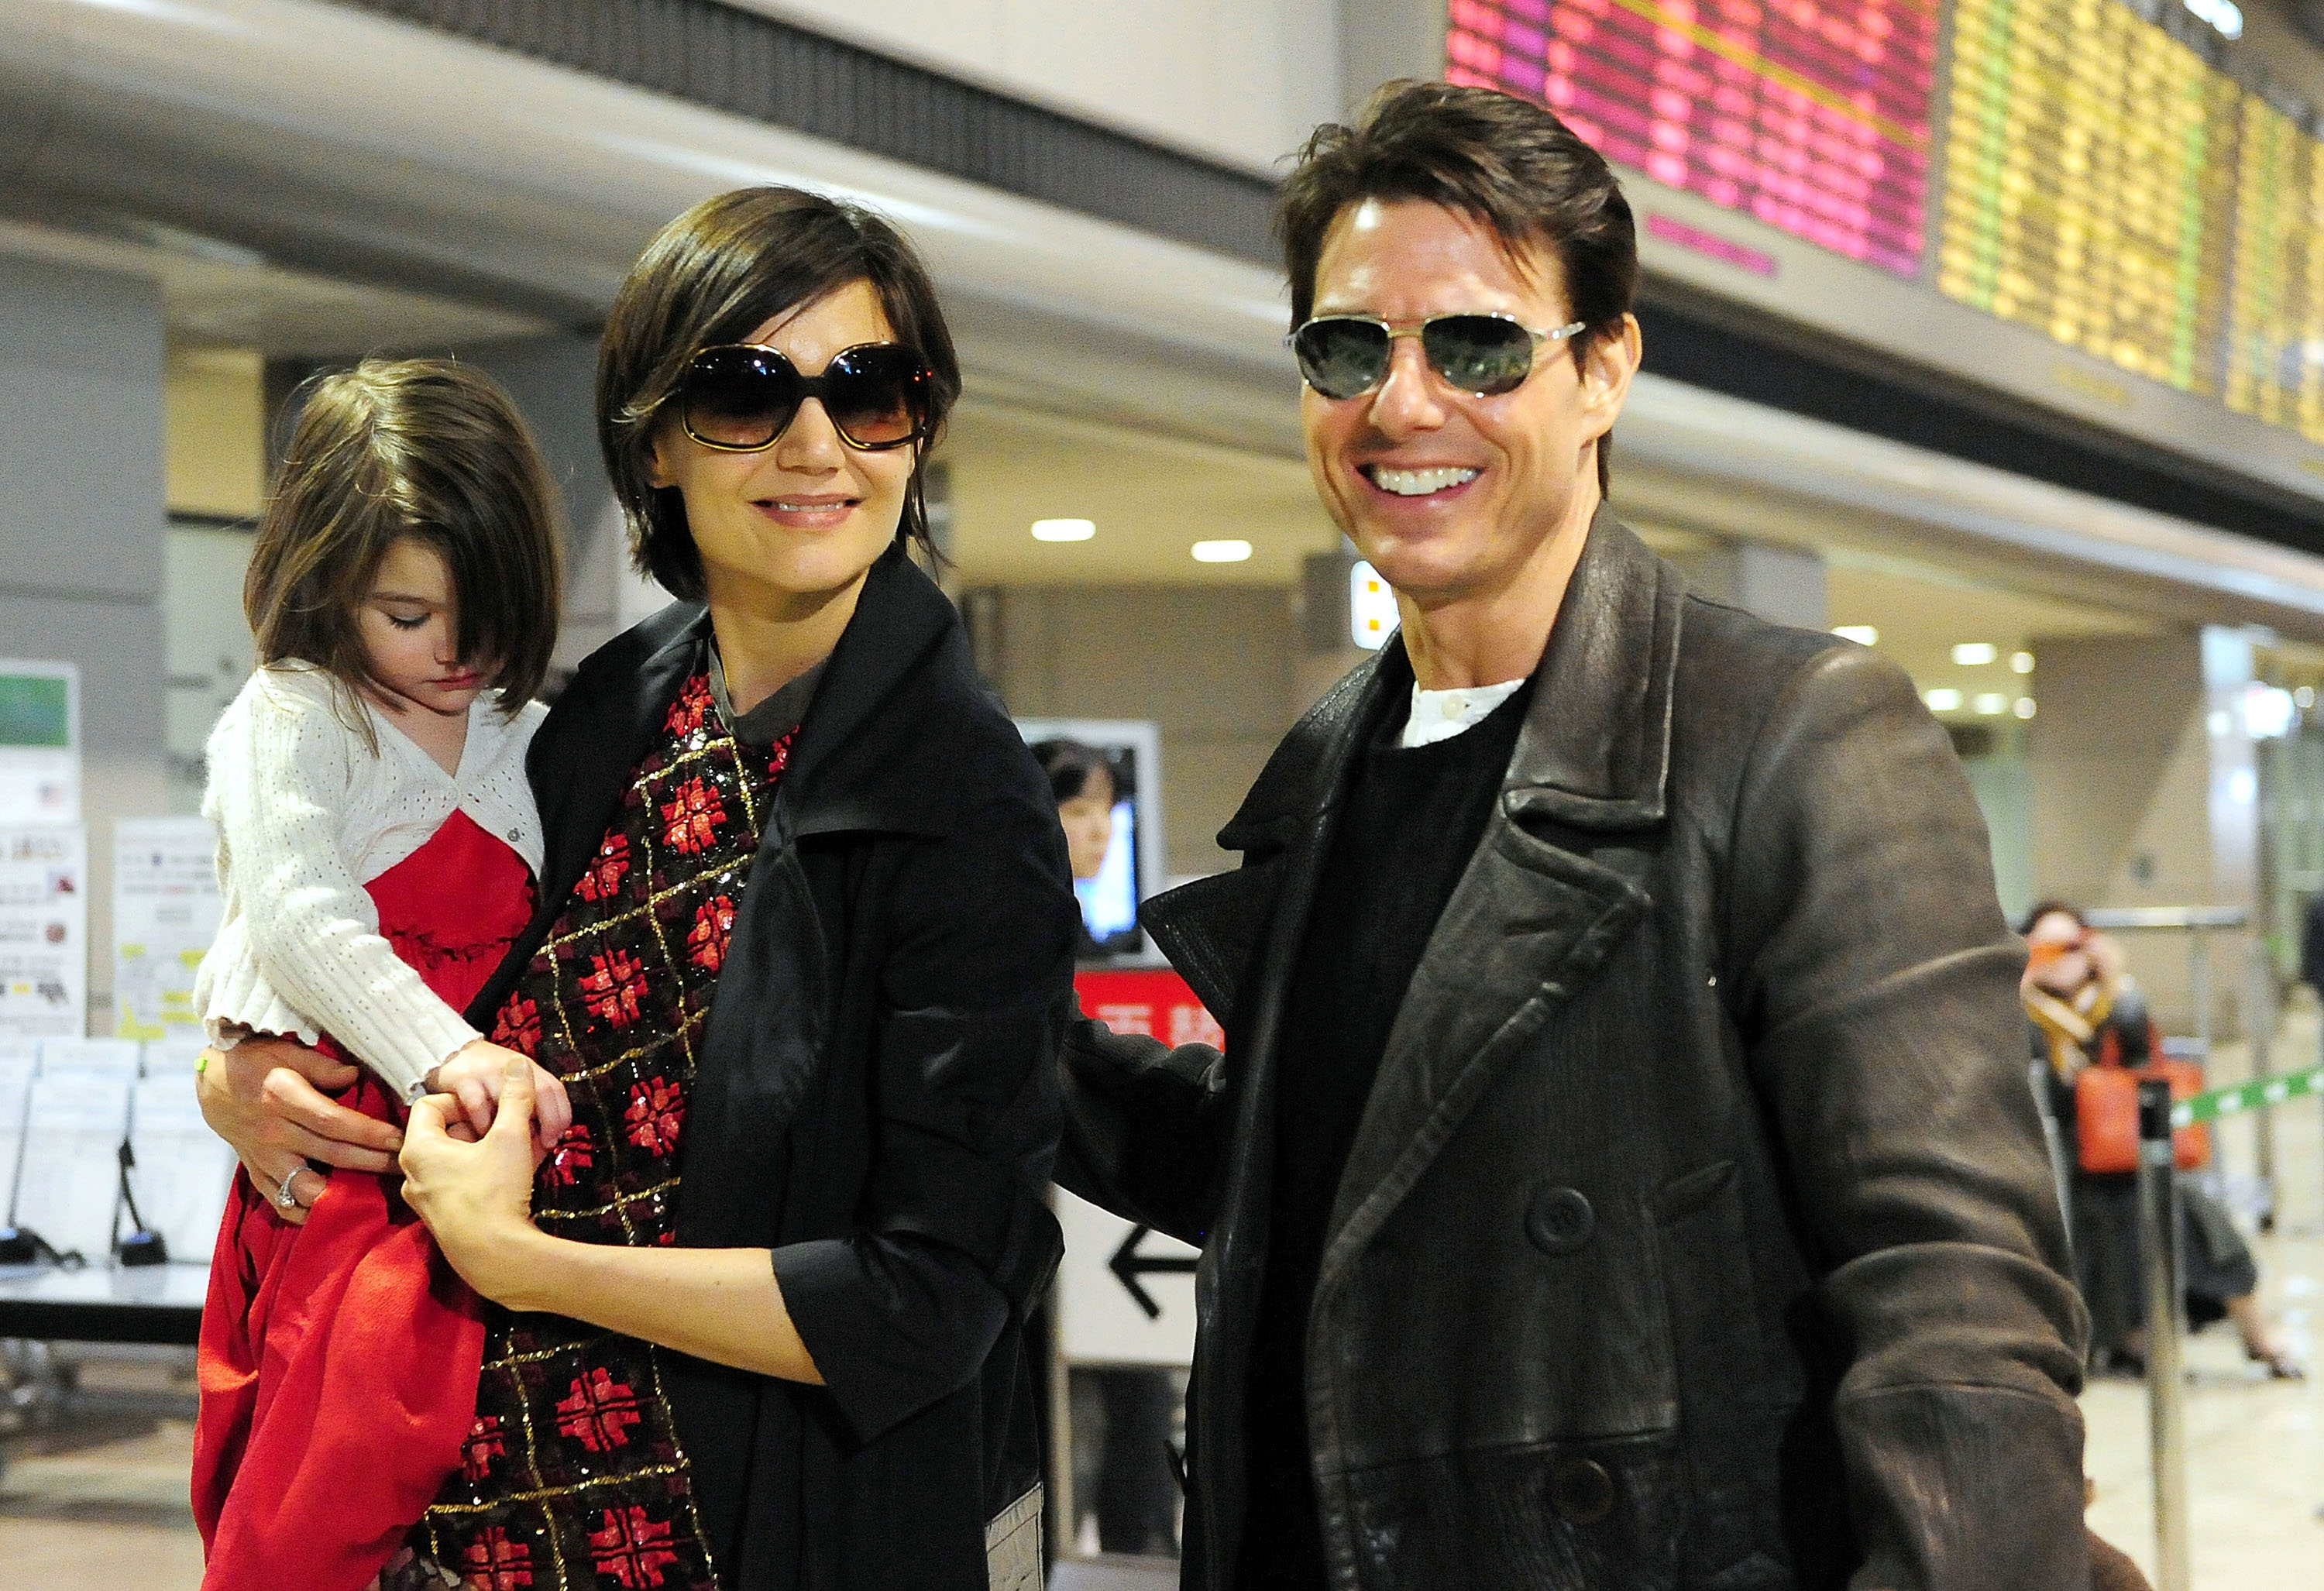 Tom Cruise, Katie Holmes and Suri Cruise on March 8, 2009, in Narita, Chiba, Japan.